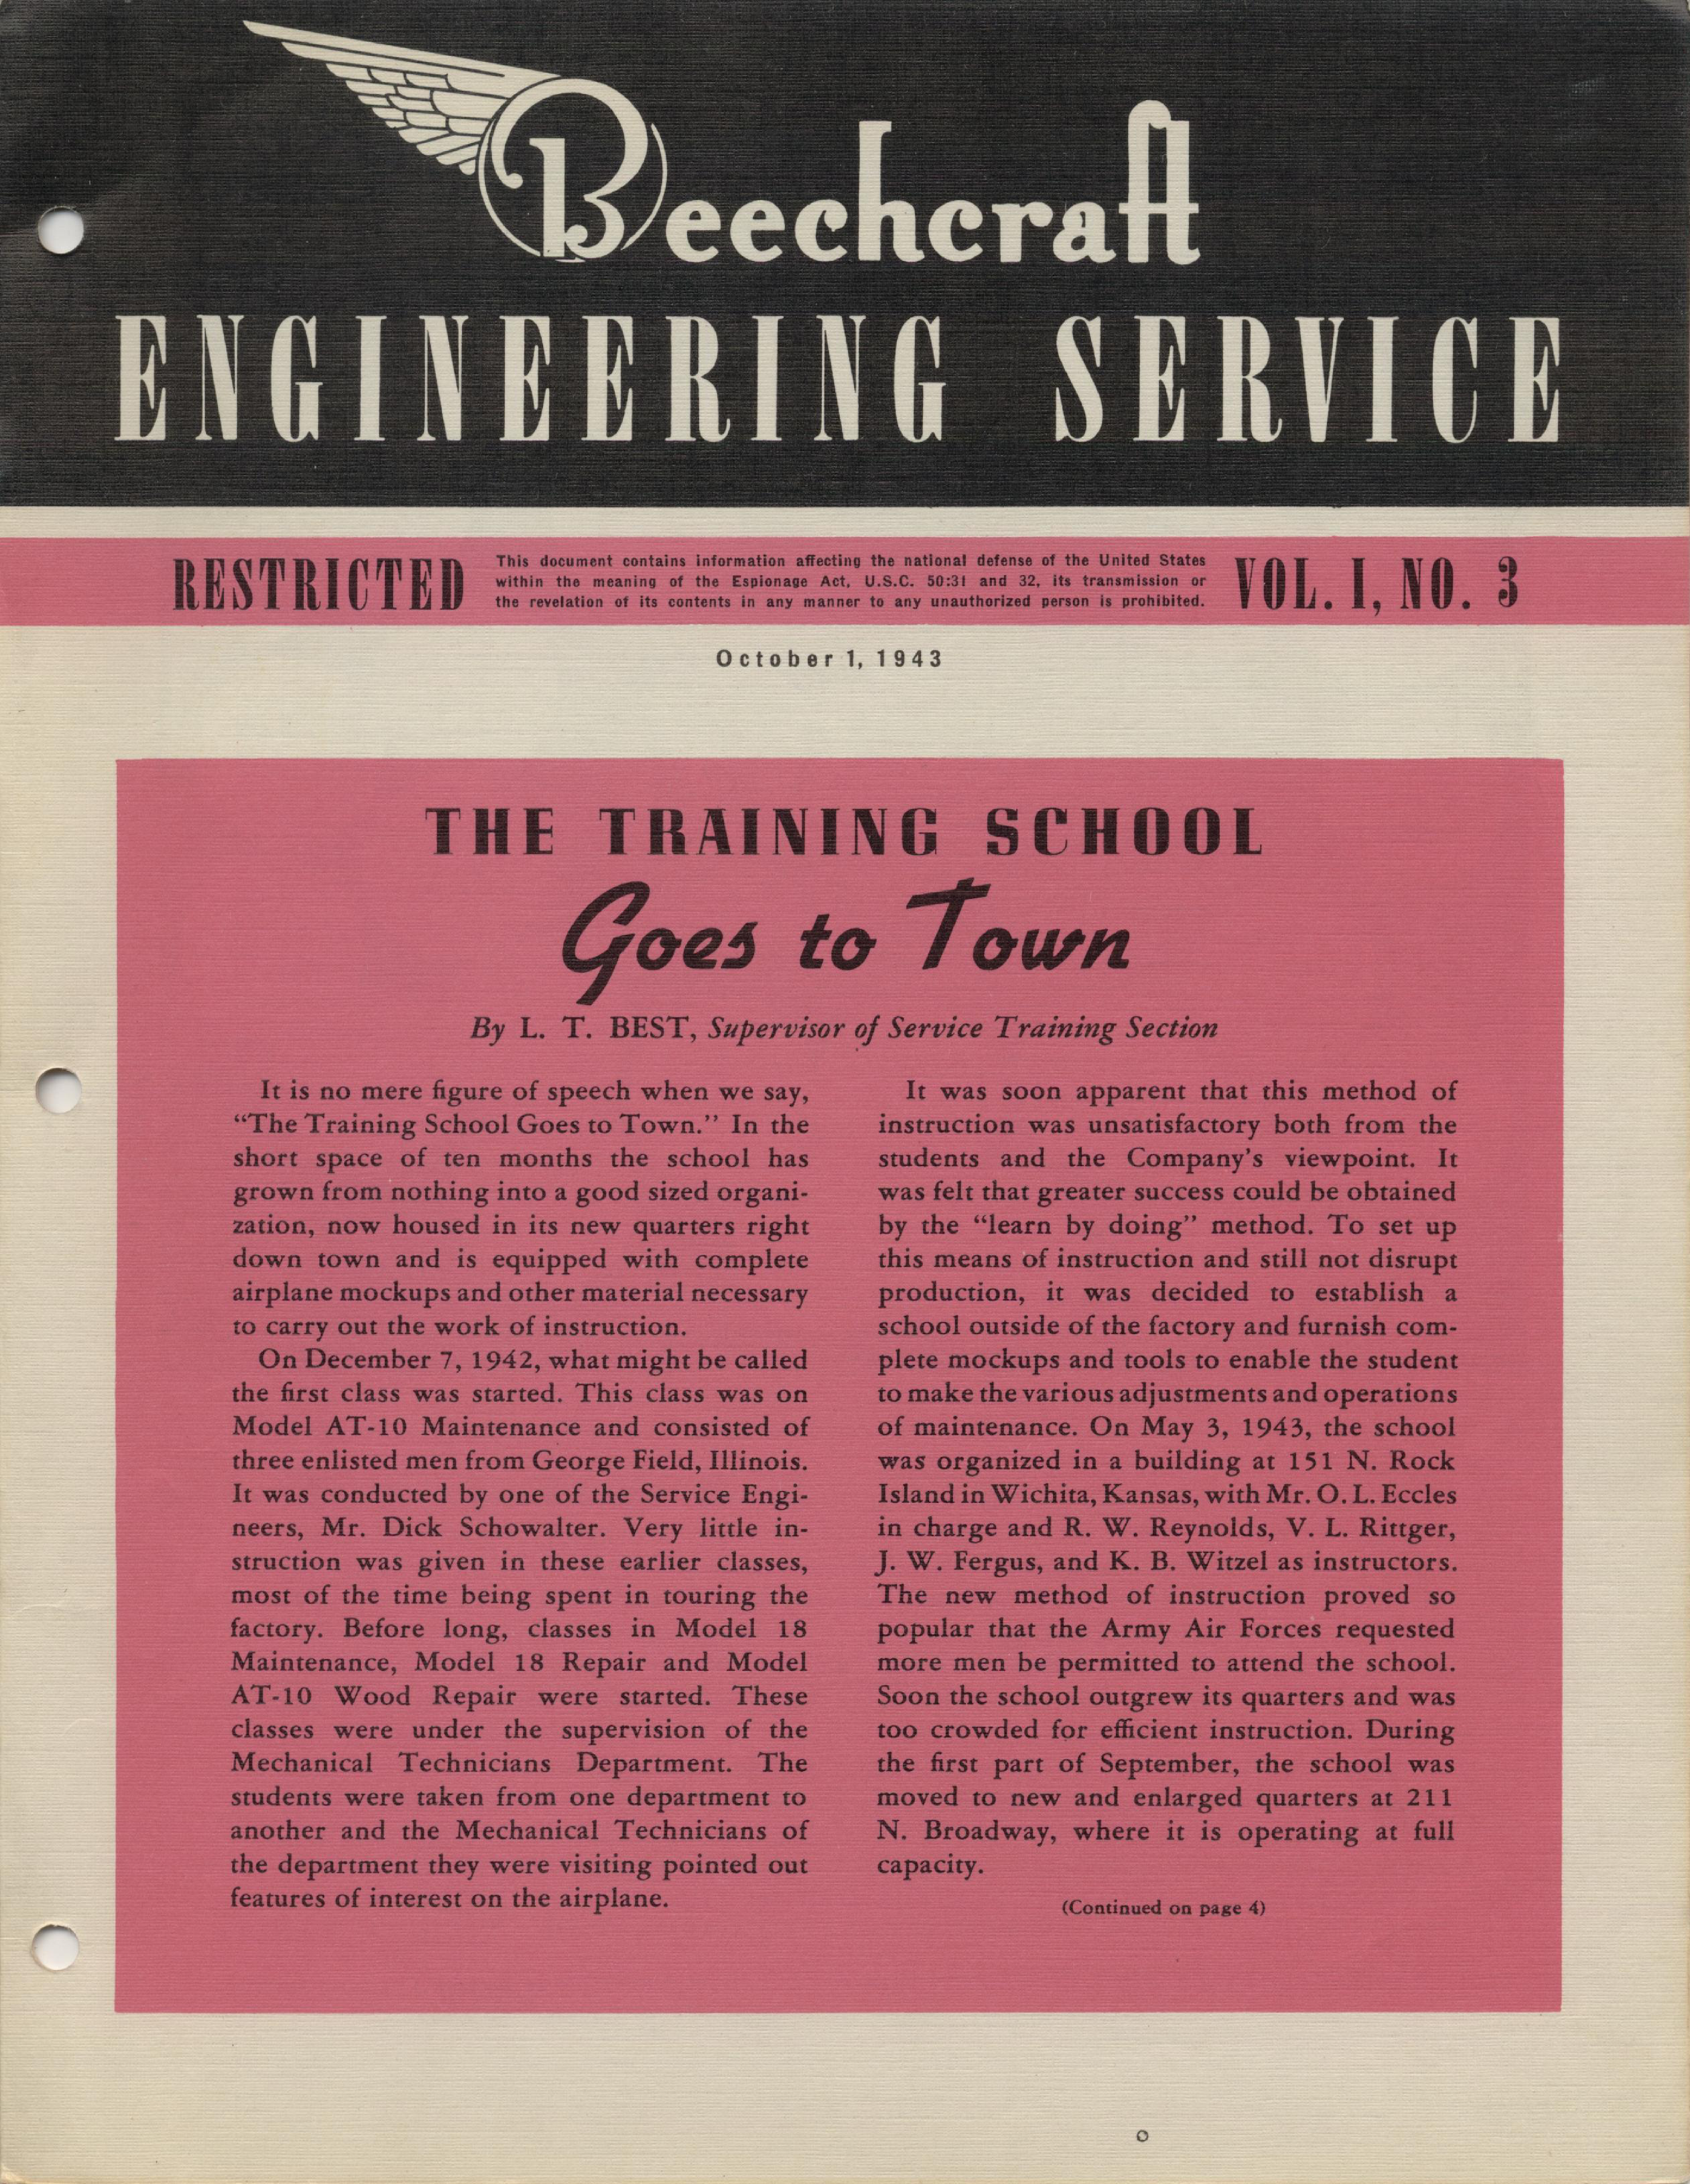 Sample page 1 from AirCorps Library document: Vol. I, No. 3 - Beechcraft Engineering Service